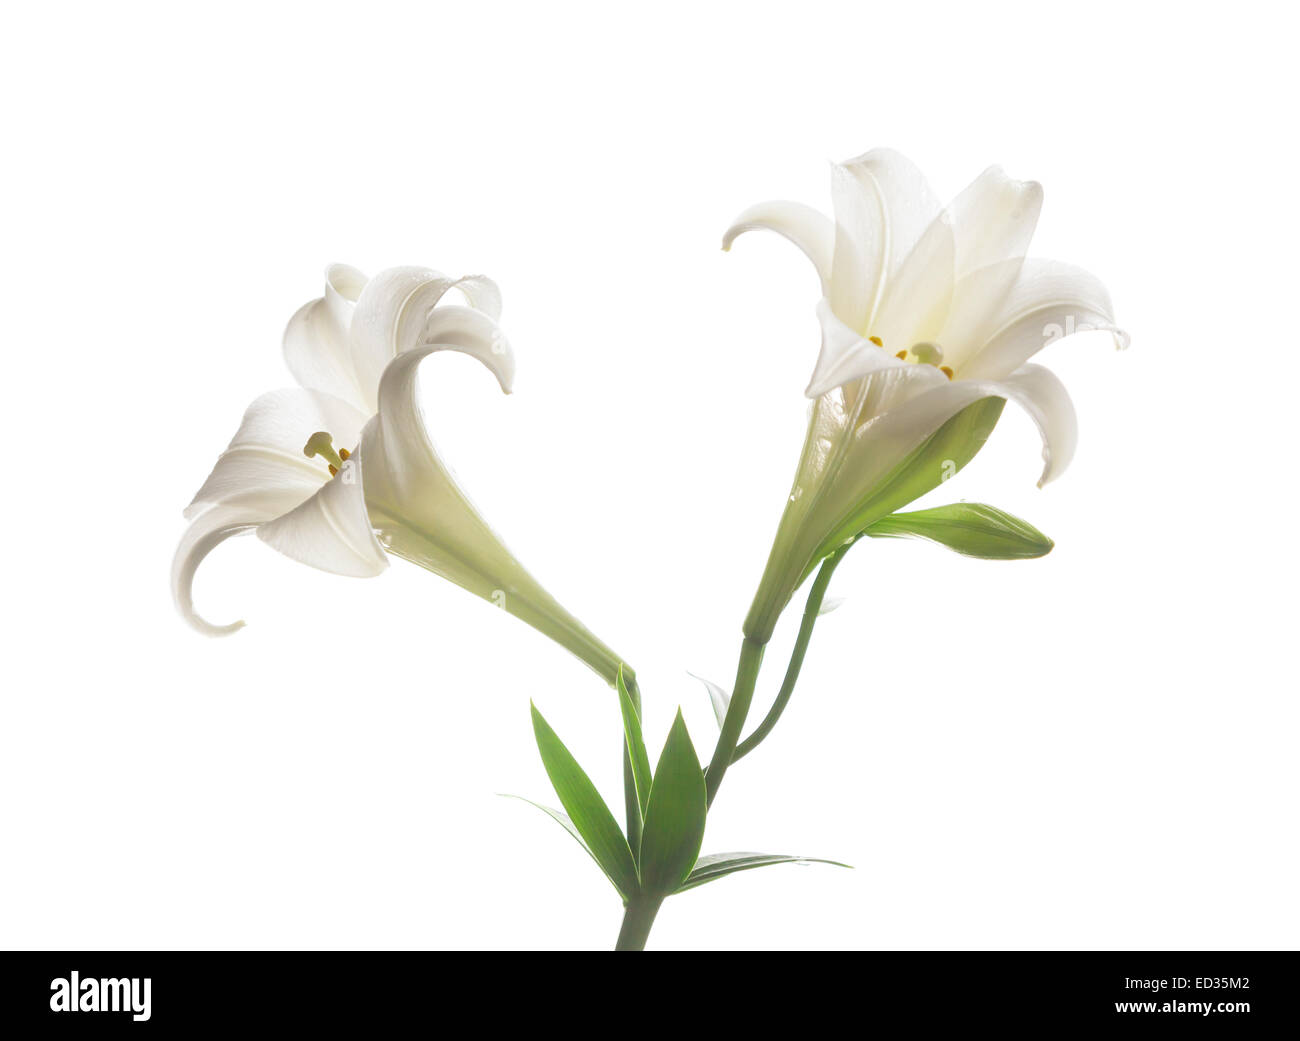 The blooming white lily after rain on the white backgroup Stock Photo